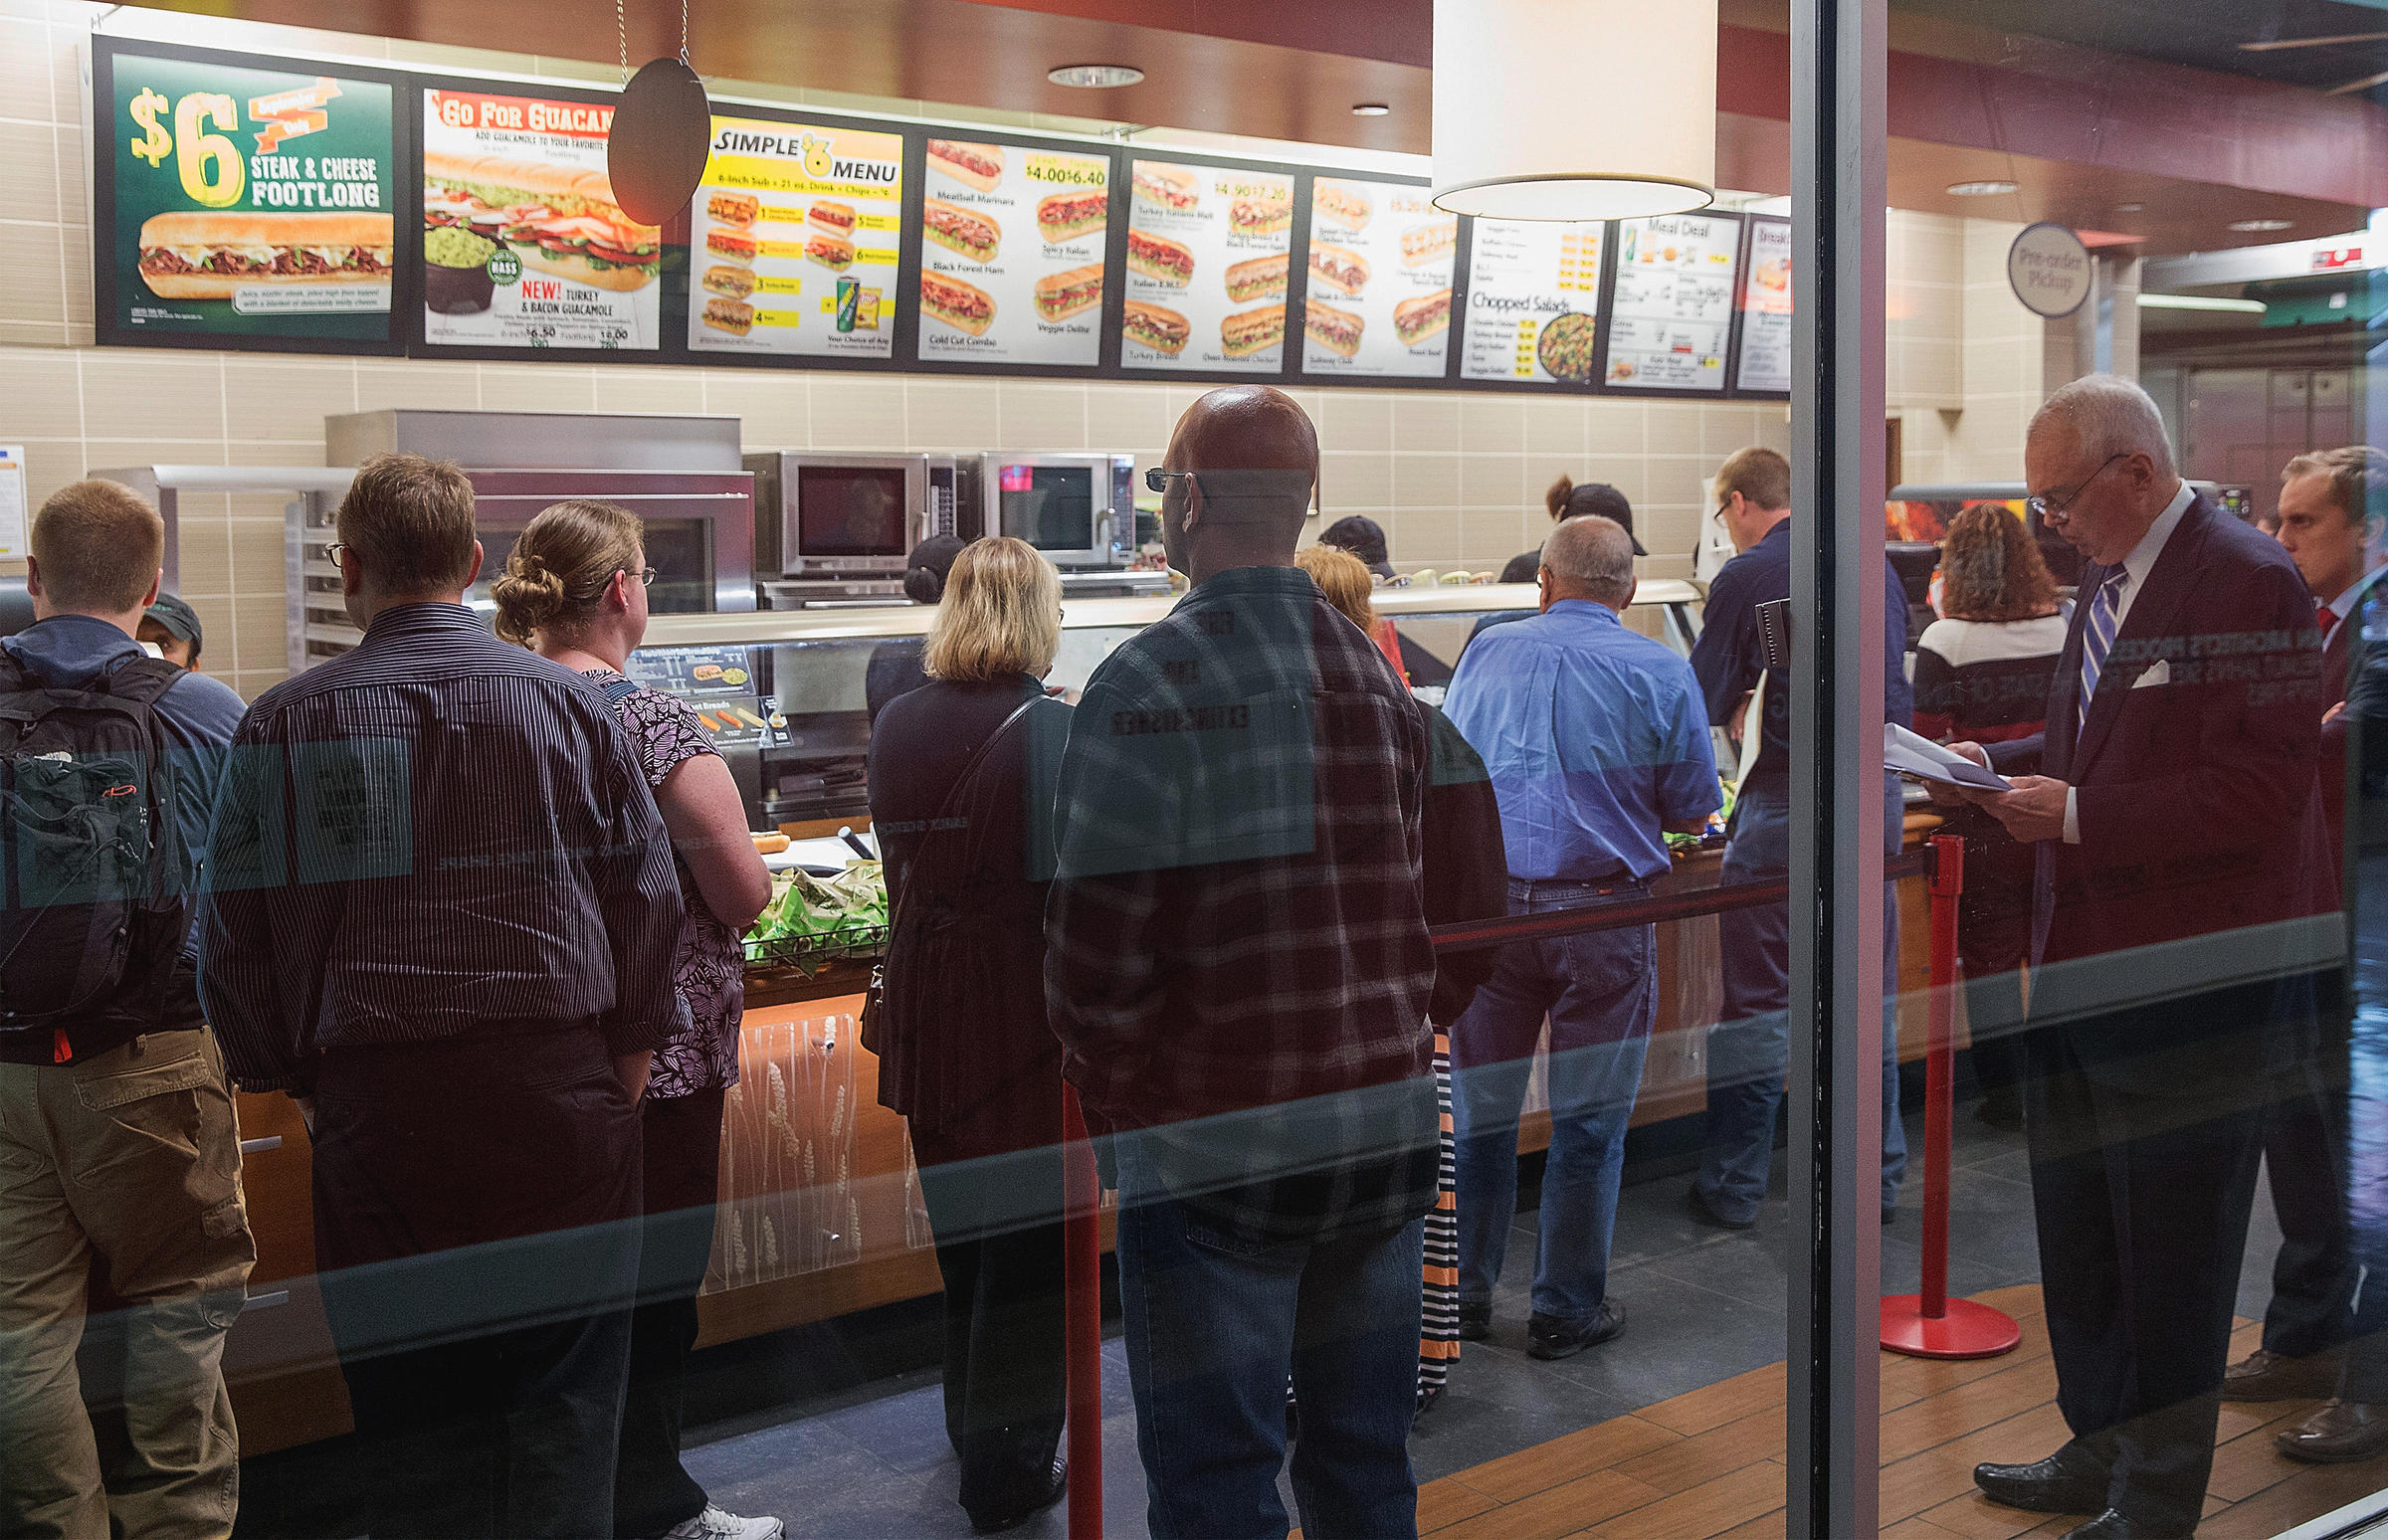 Diners wait in line at a Subway sandwich shop on September 15, 2015 in Chicago, Ill. Subway will serve antibiotic-free turkey and chicken by the end of 2016, but it may take nine years for its suppliers of beef and pork to go antibiotic-free as well